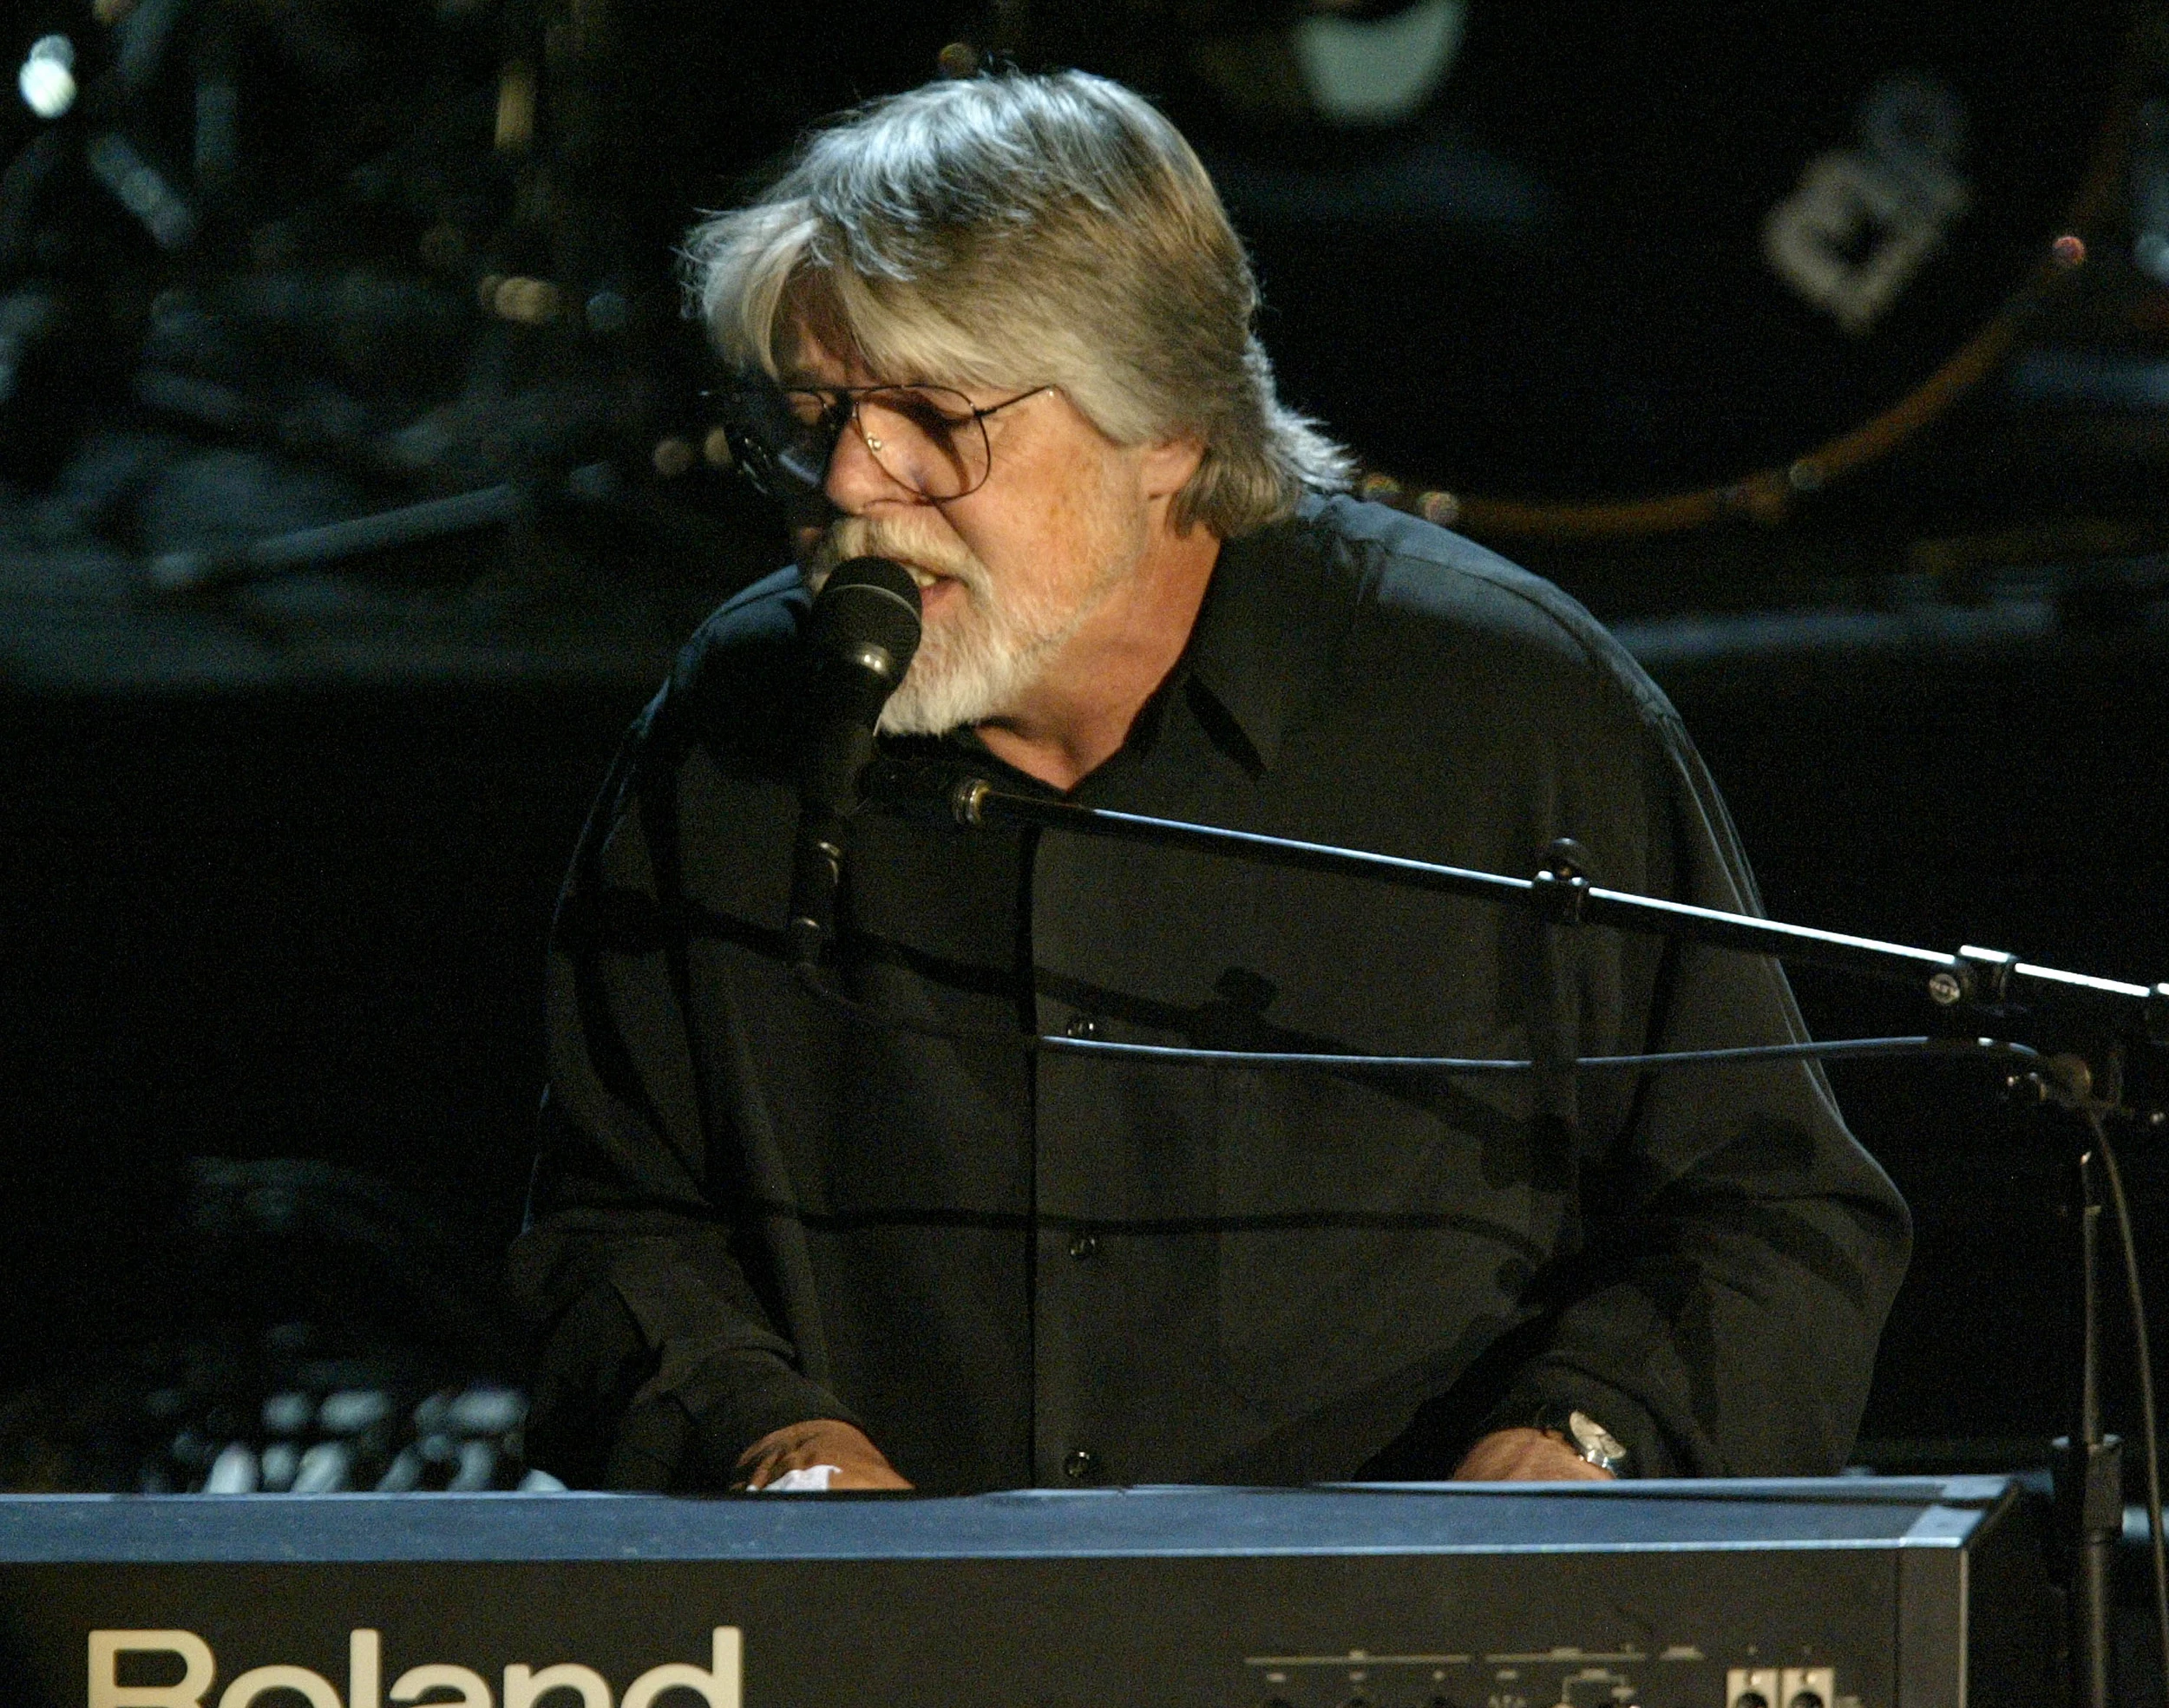 The Palace of Auburn Hills To Close After Bob Seger Concert